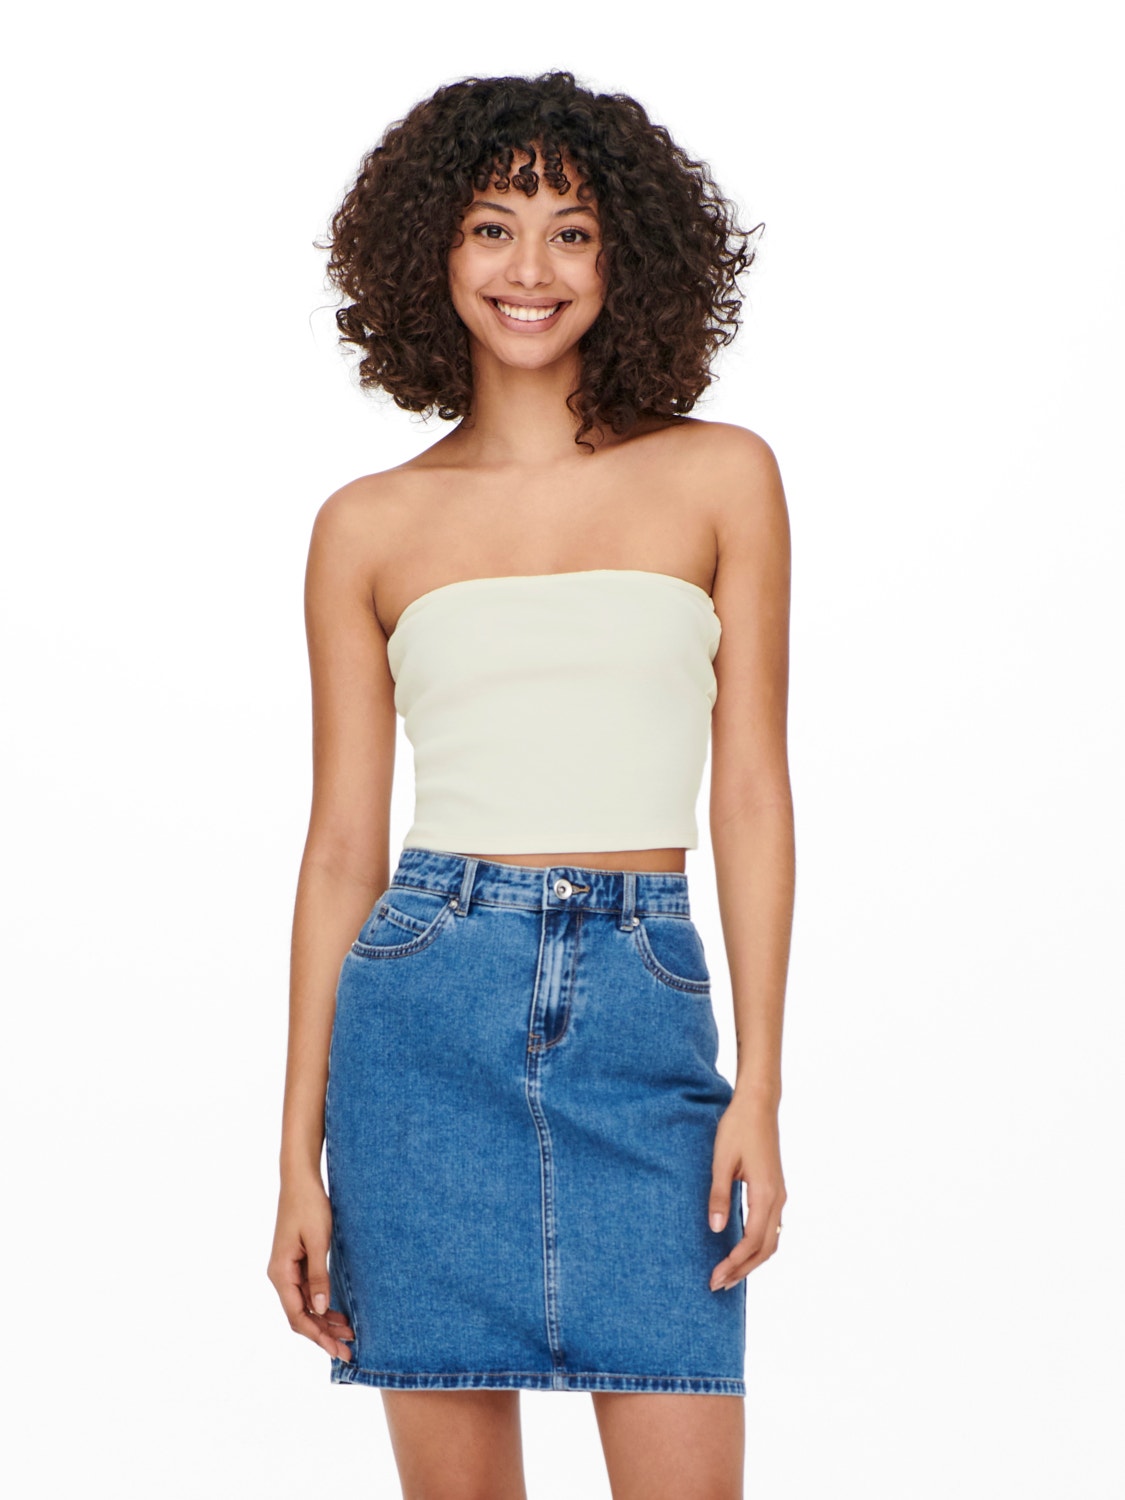 ONLY Slim Fit Strapless Top -Cloud Dancer - 15257744